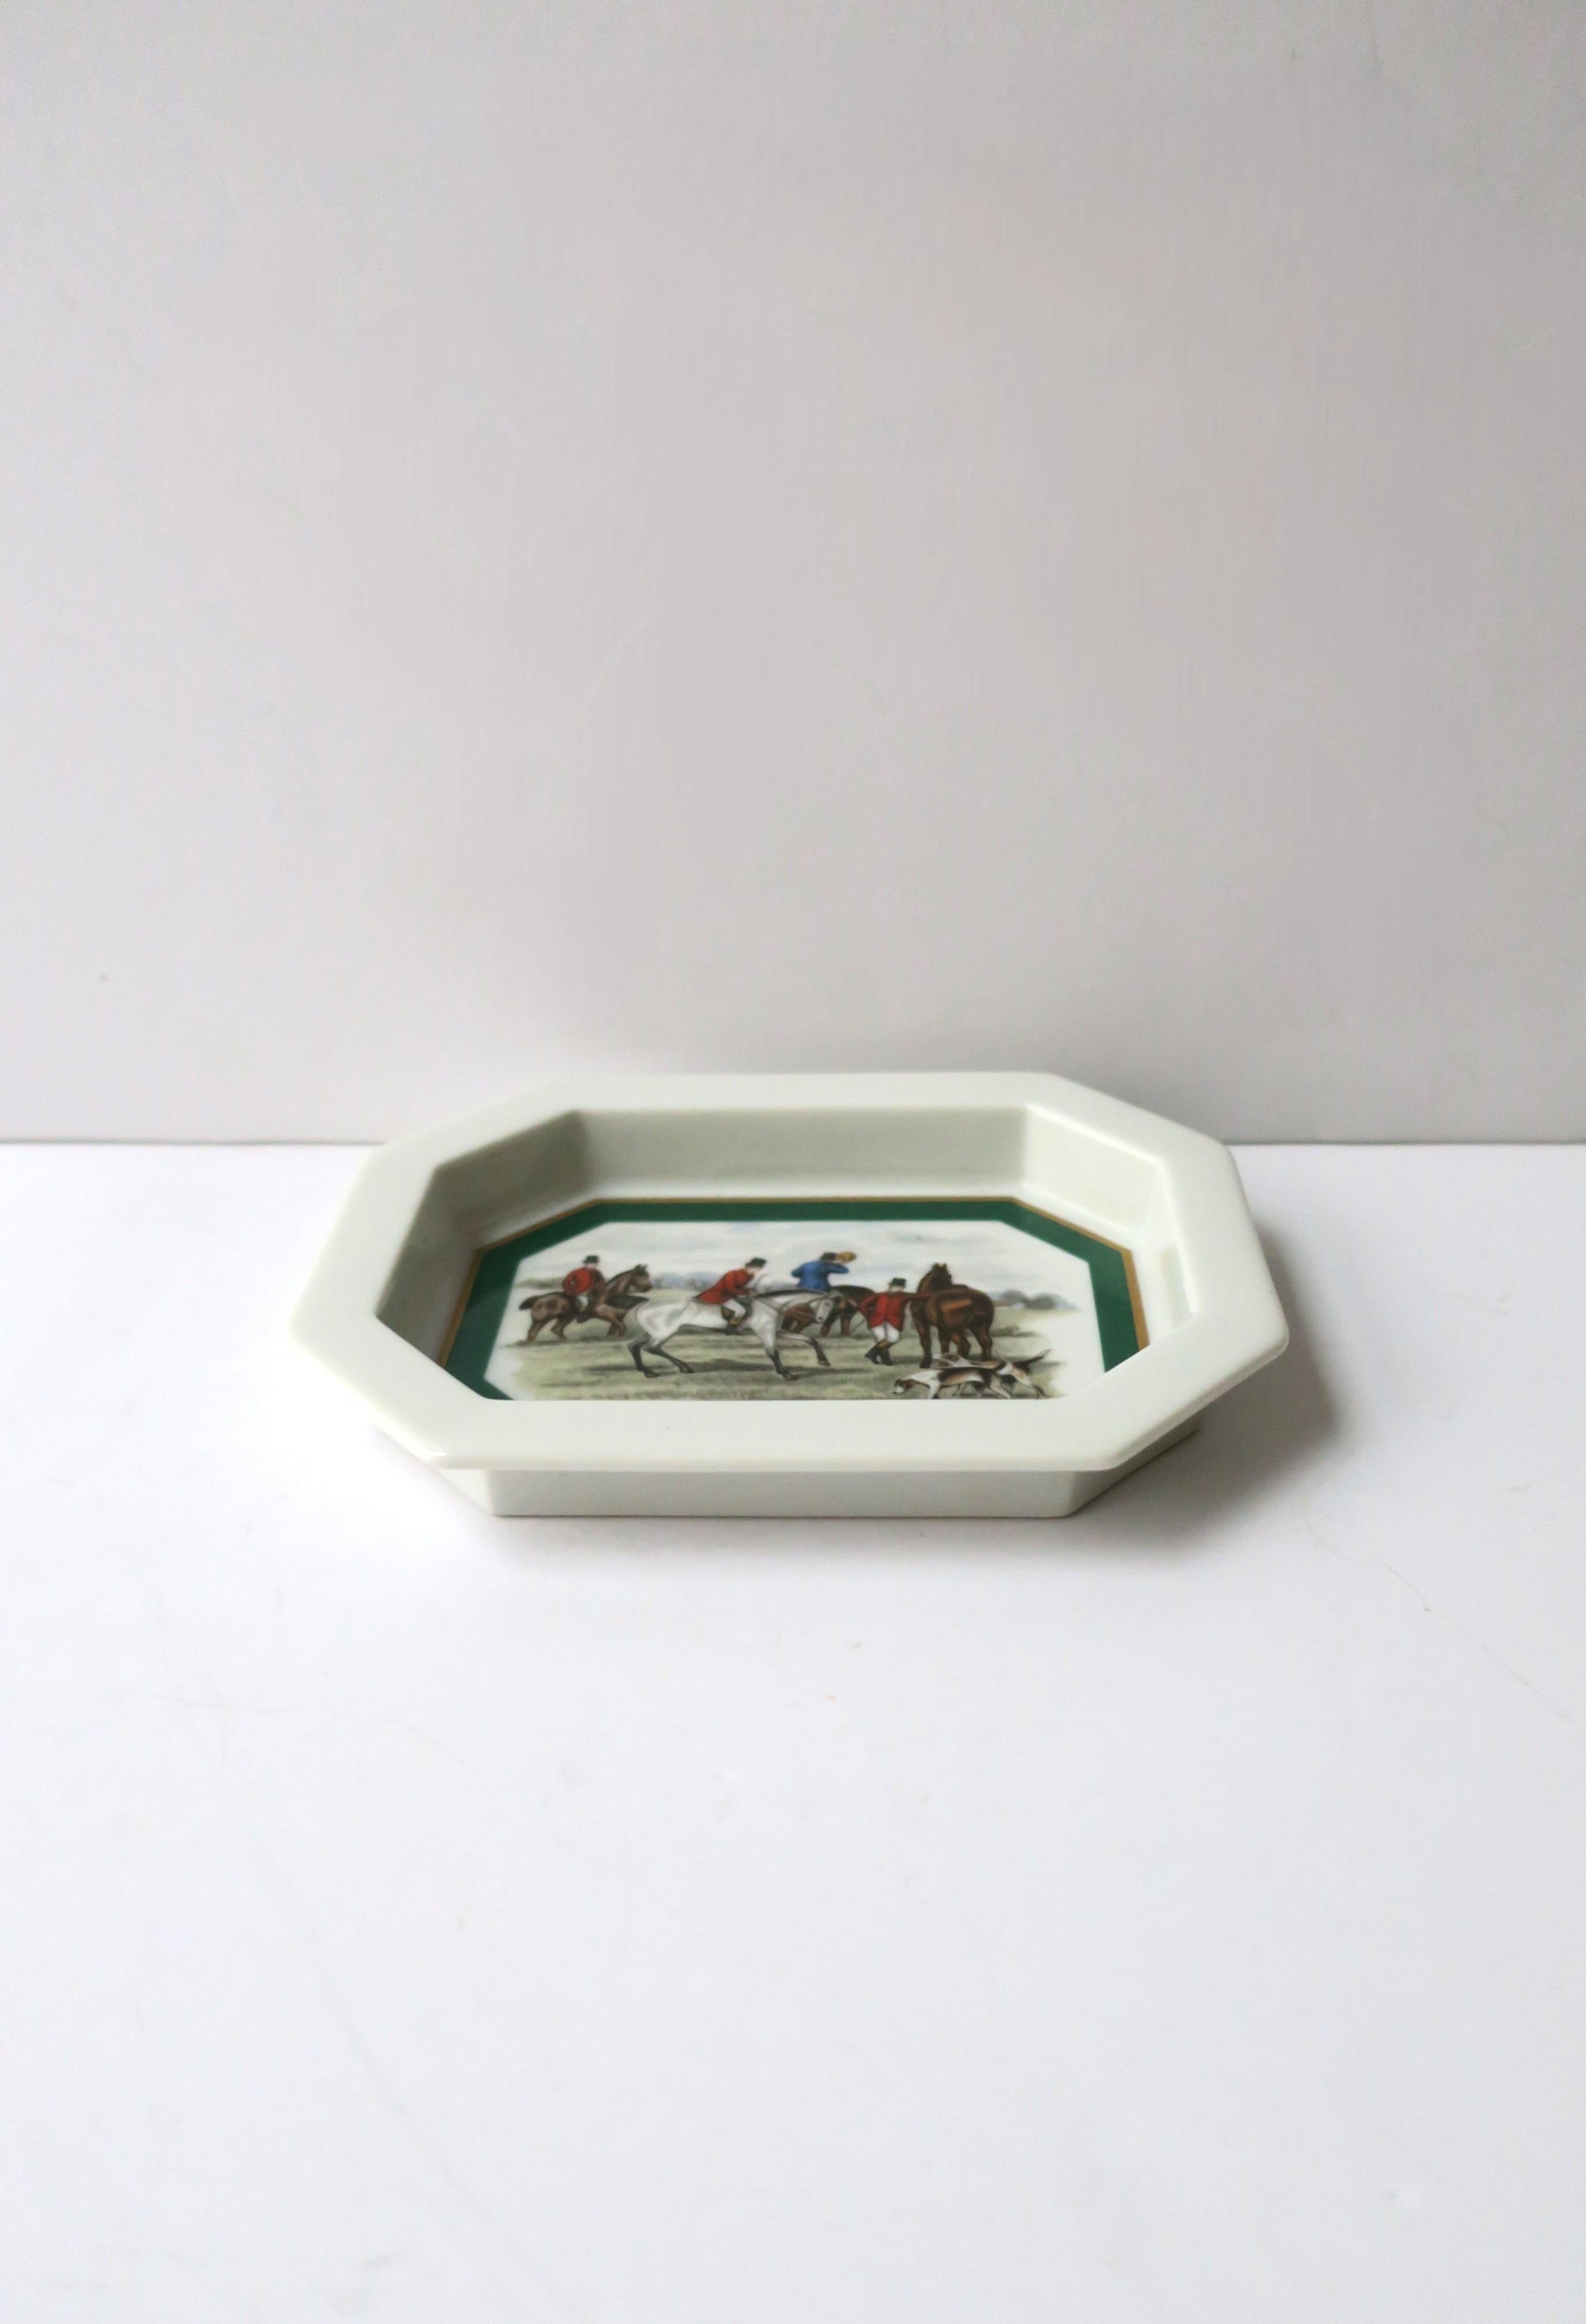 Porcelain Jewelry Dish with Equestrian Horse Scene In Good Condition For Sale In New York, NY